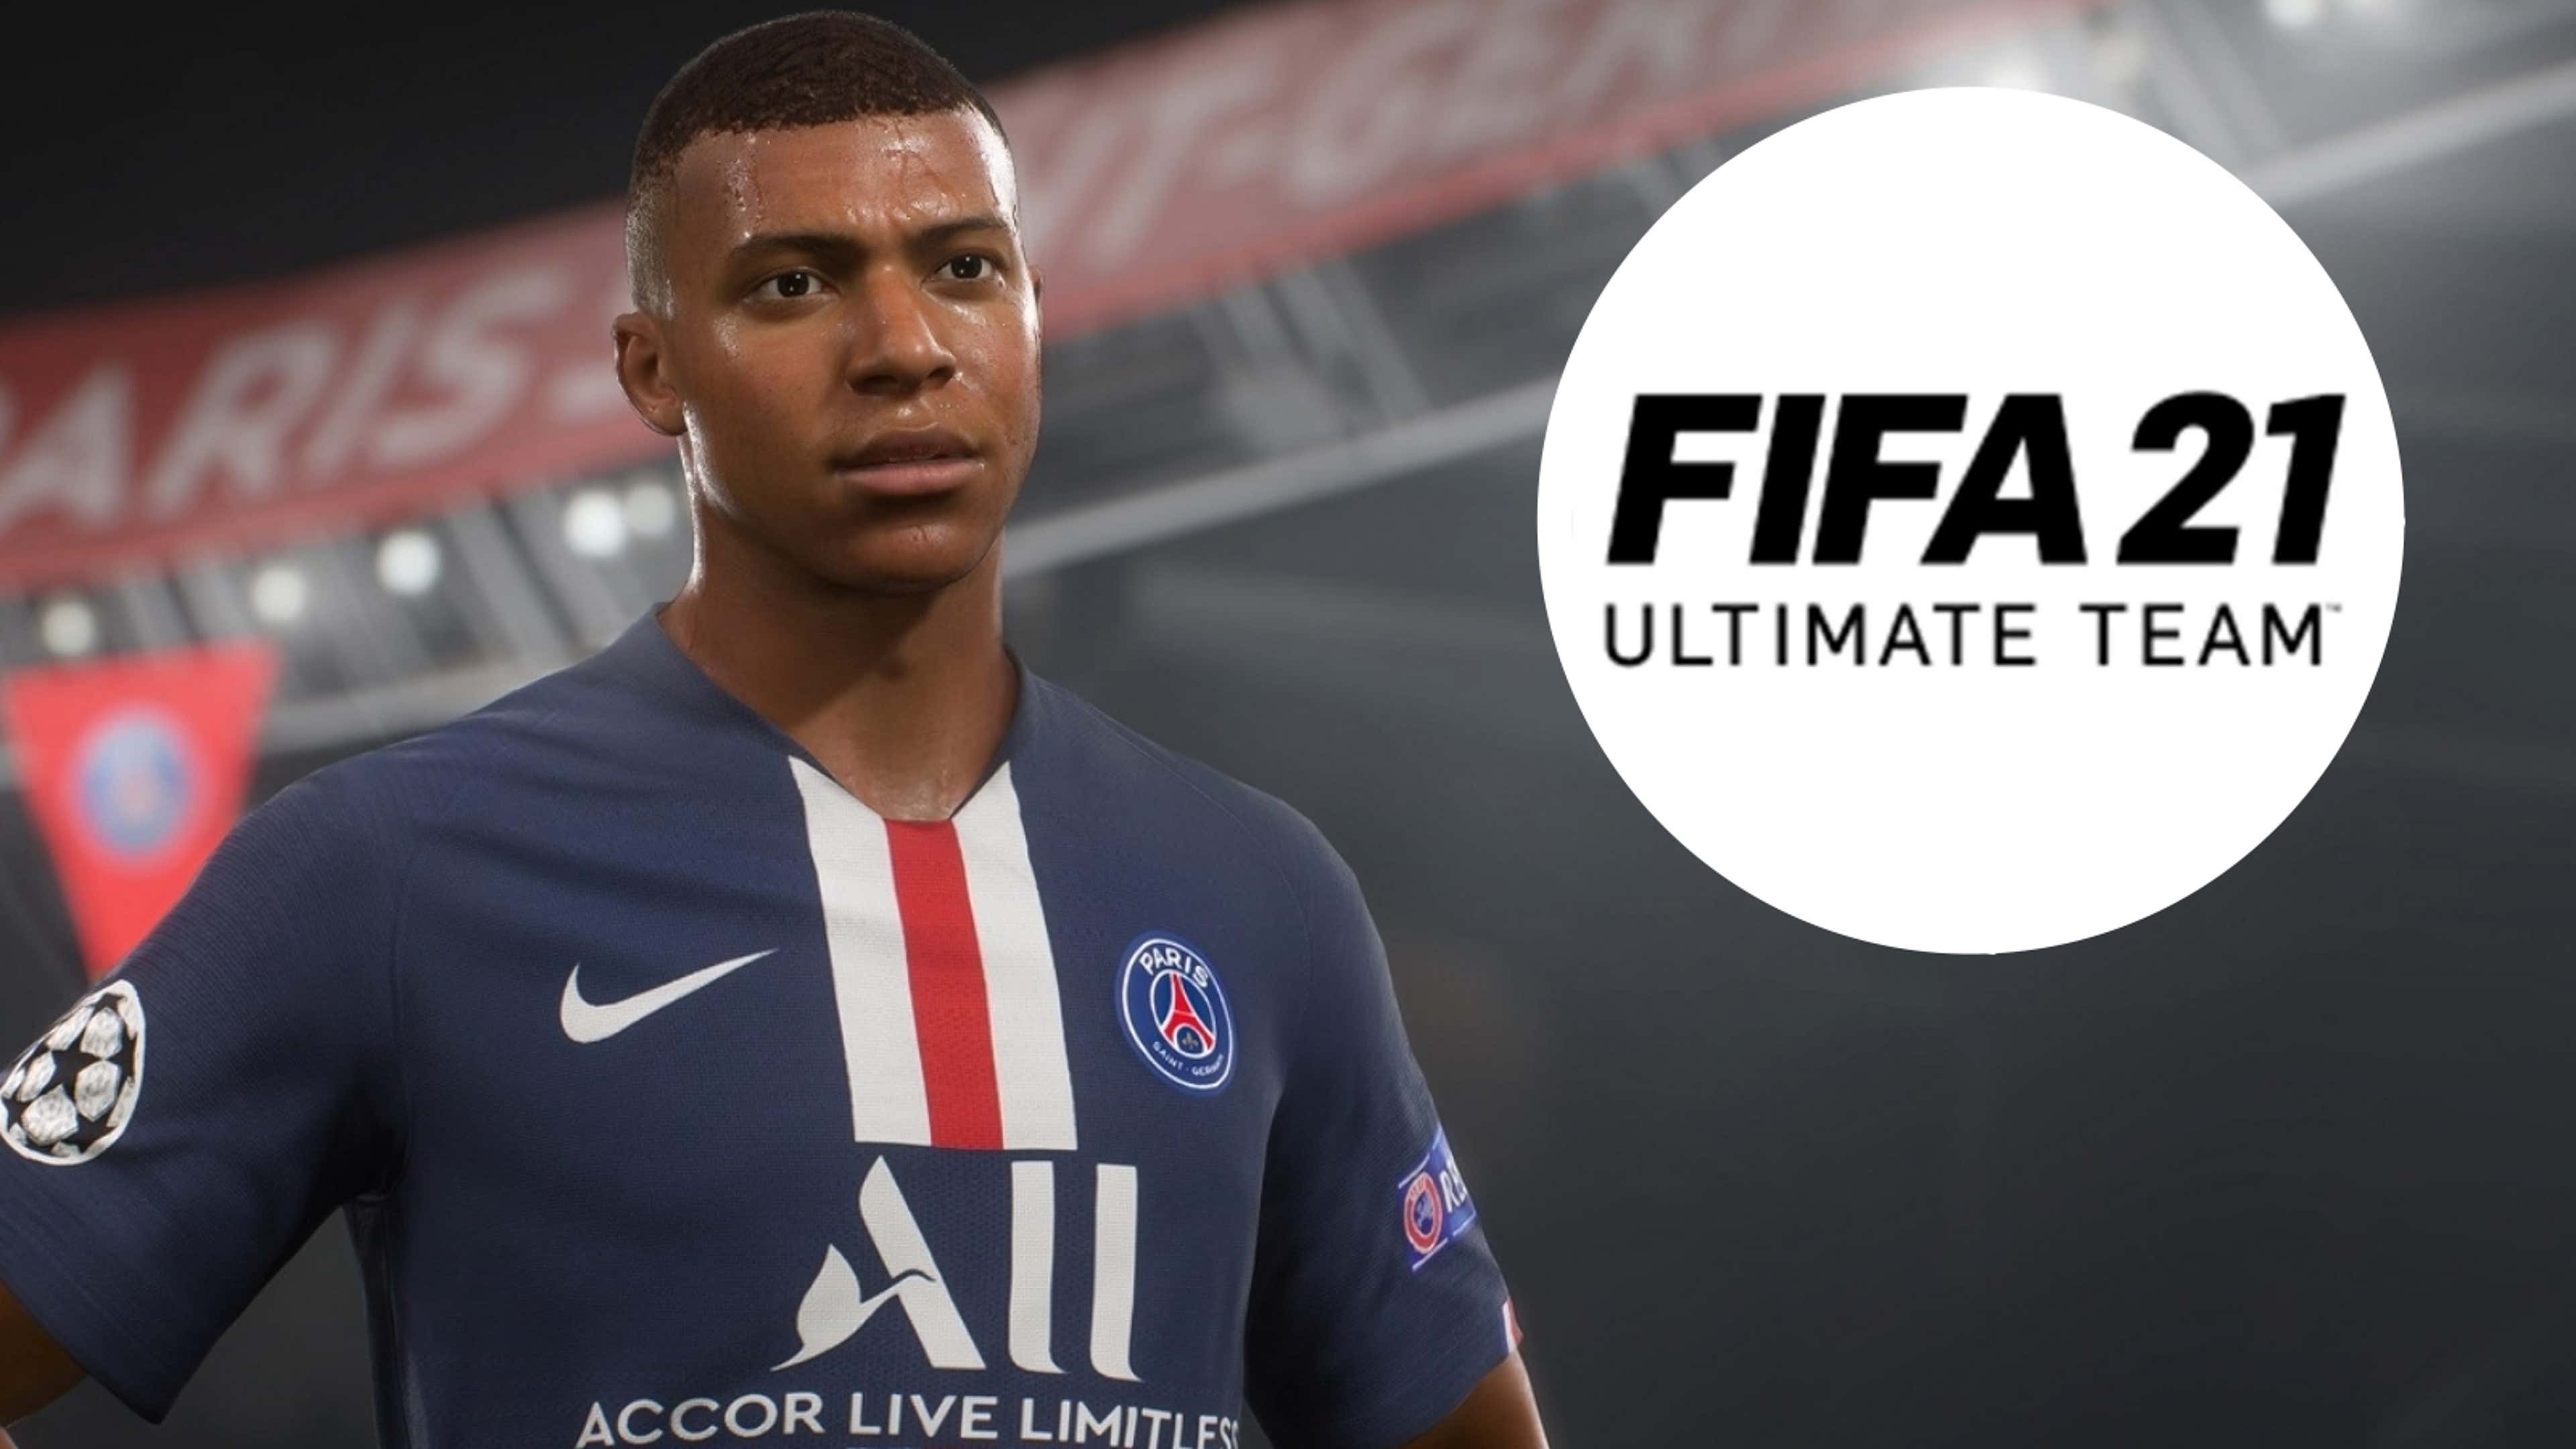 FIFA 21 is Available Now on Xbox One - Xbox Wire